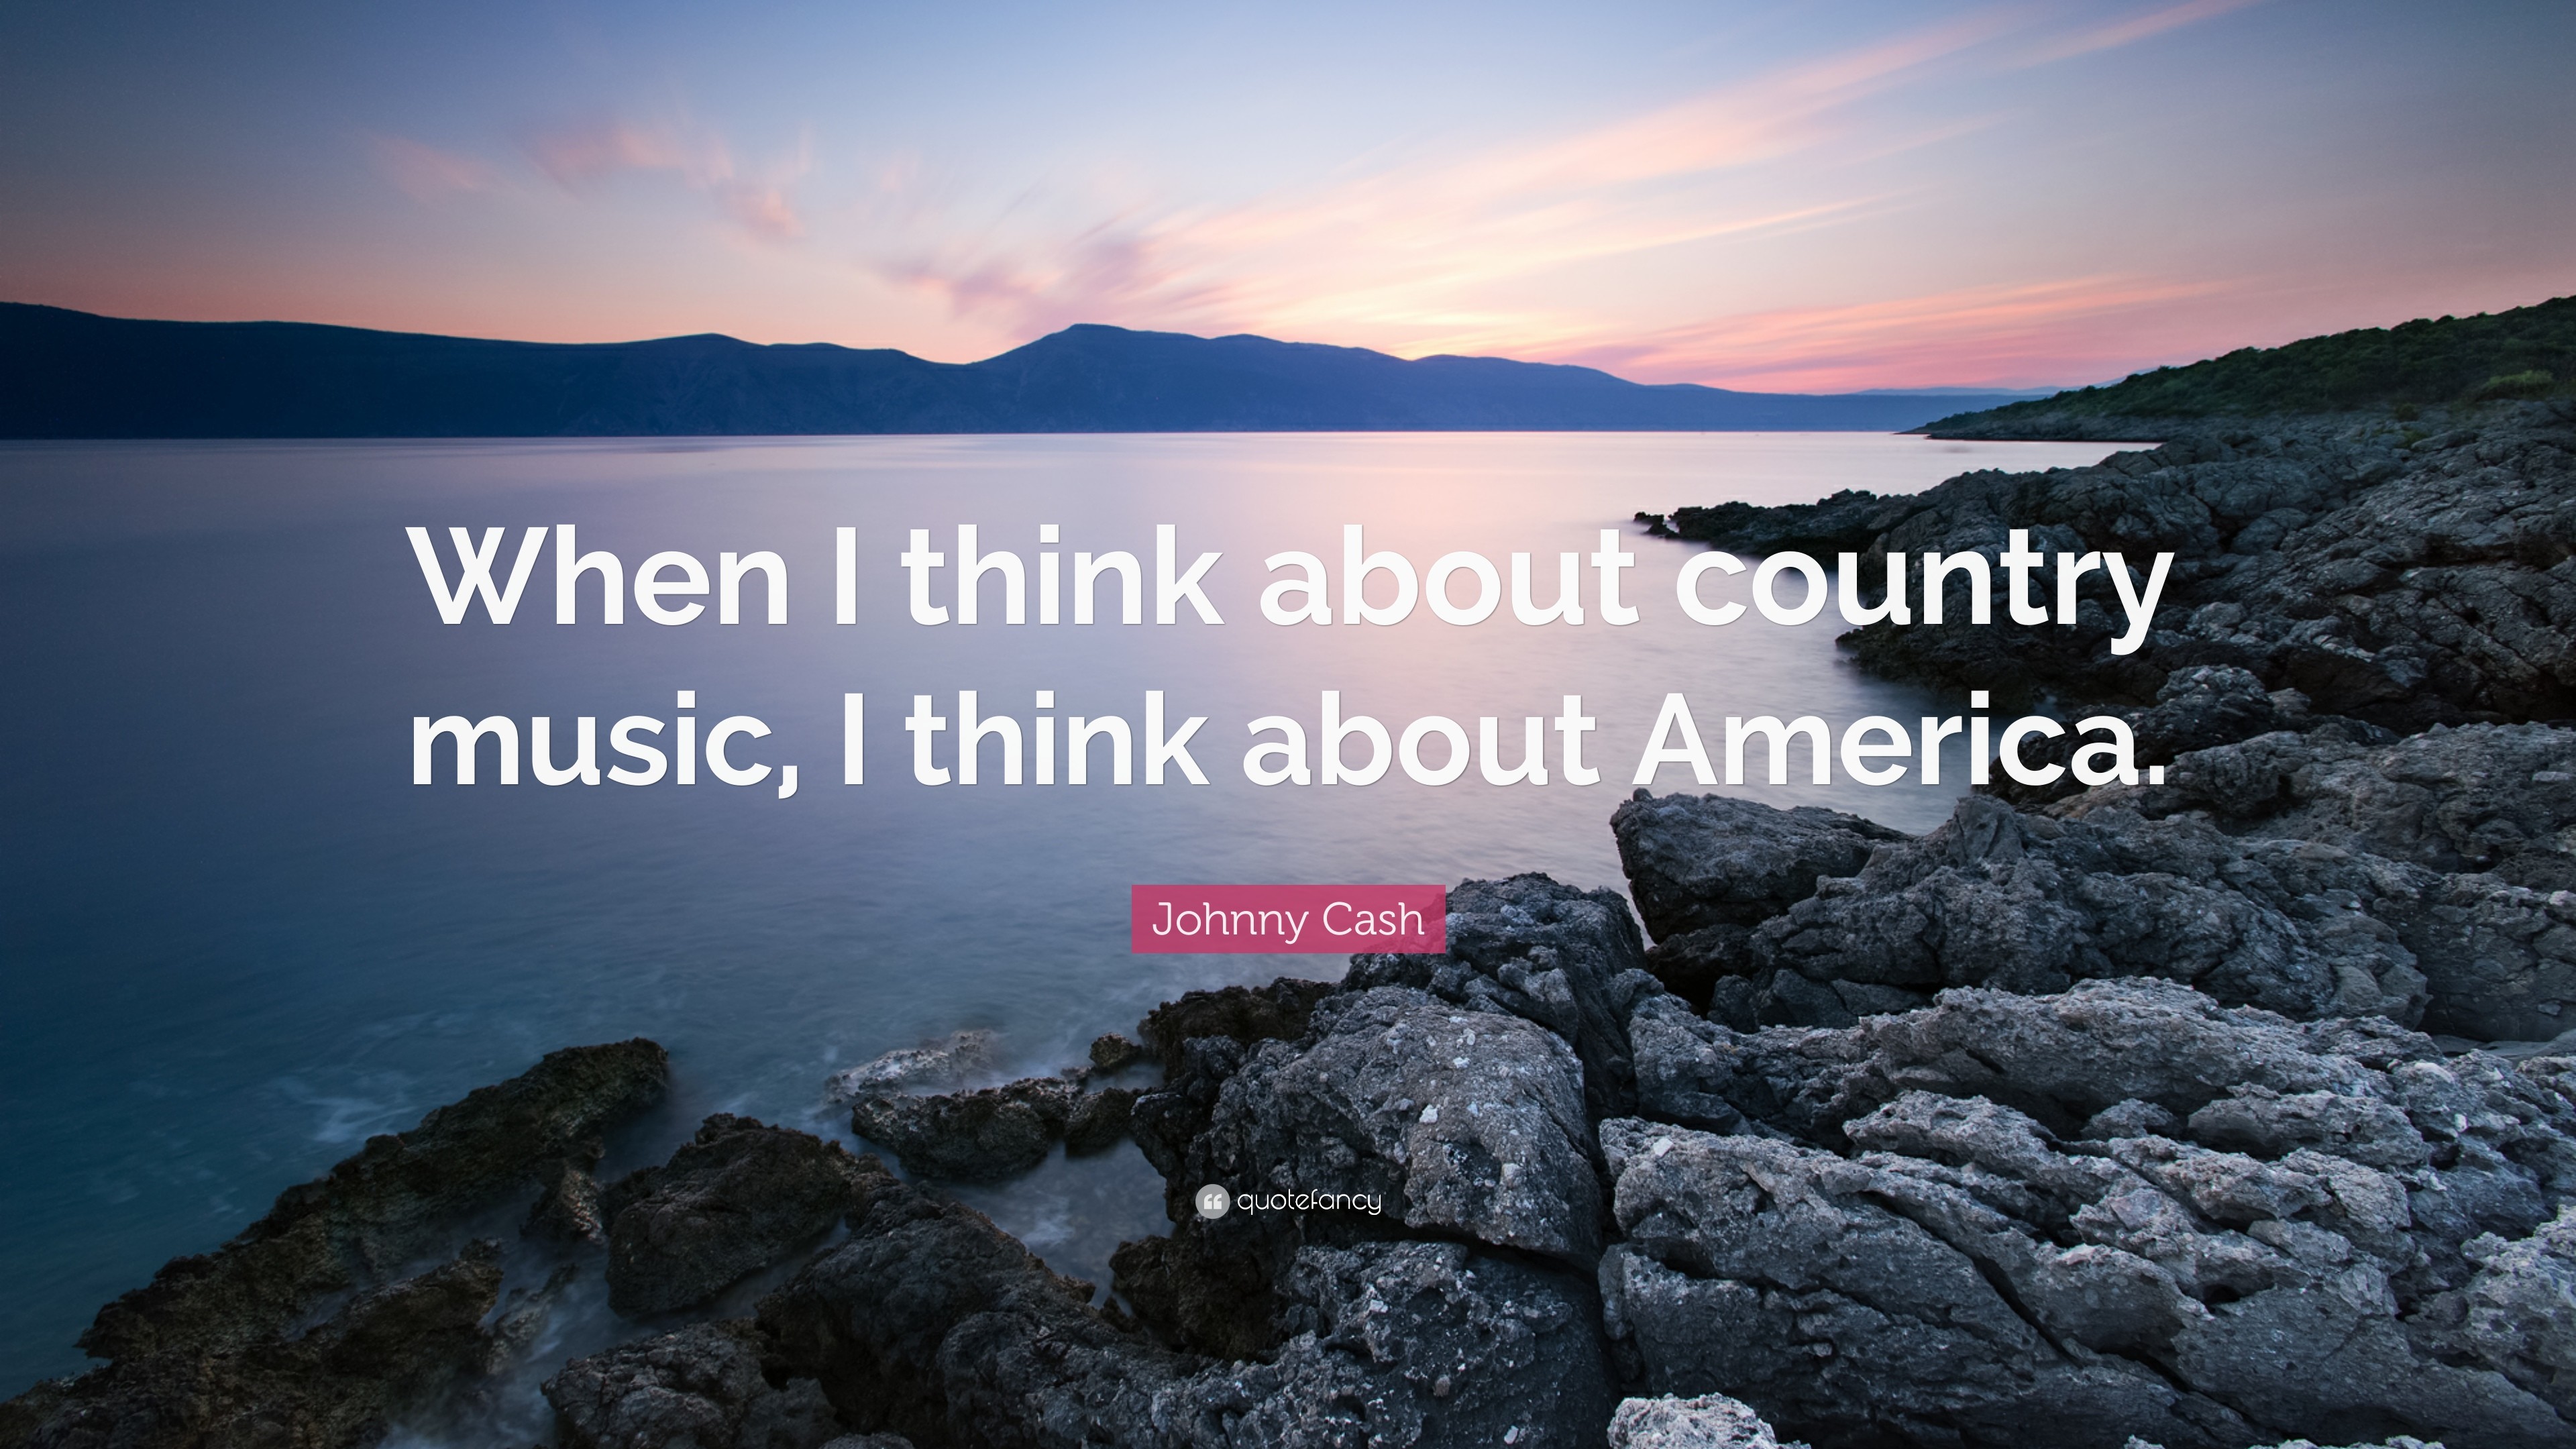 3840x2160 Johnny Cash Quote: “When I think about country music, I think about America